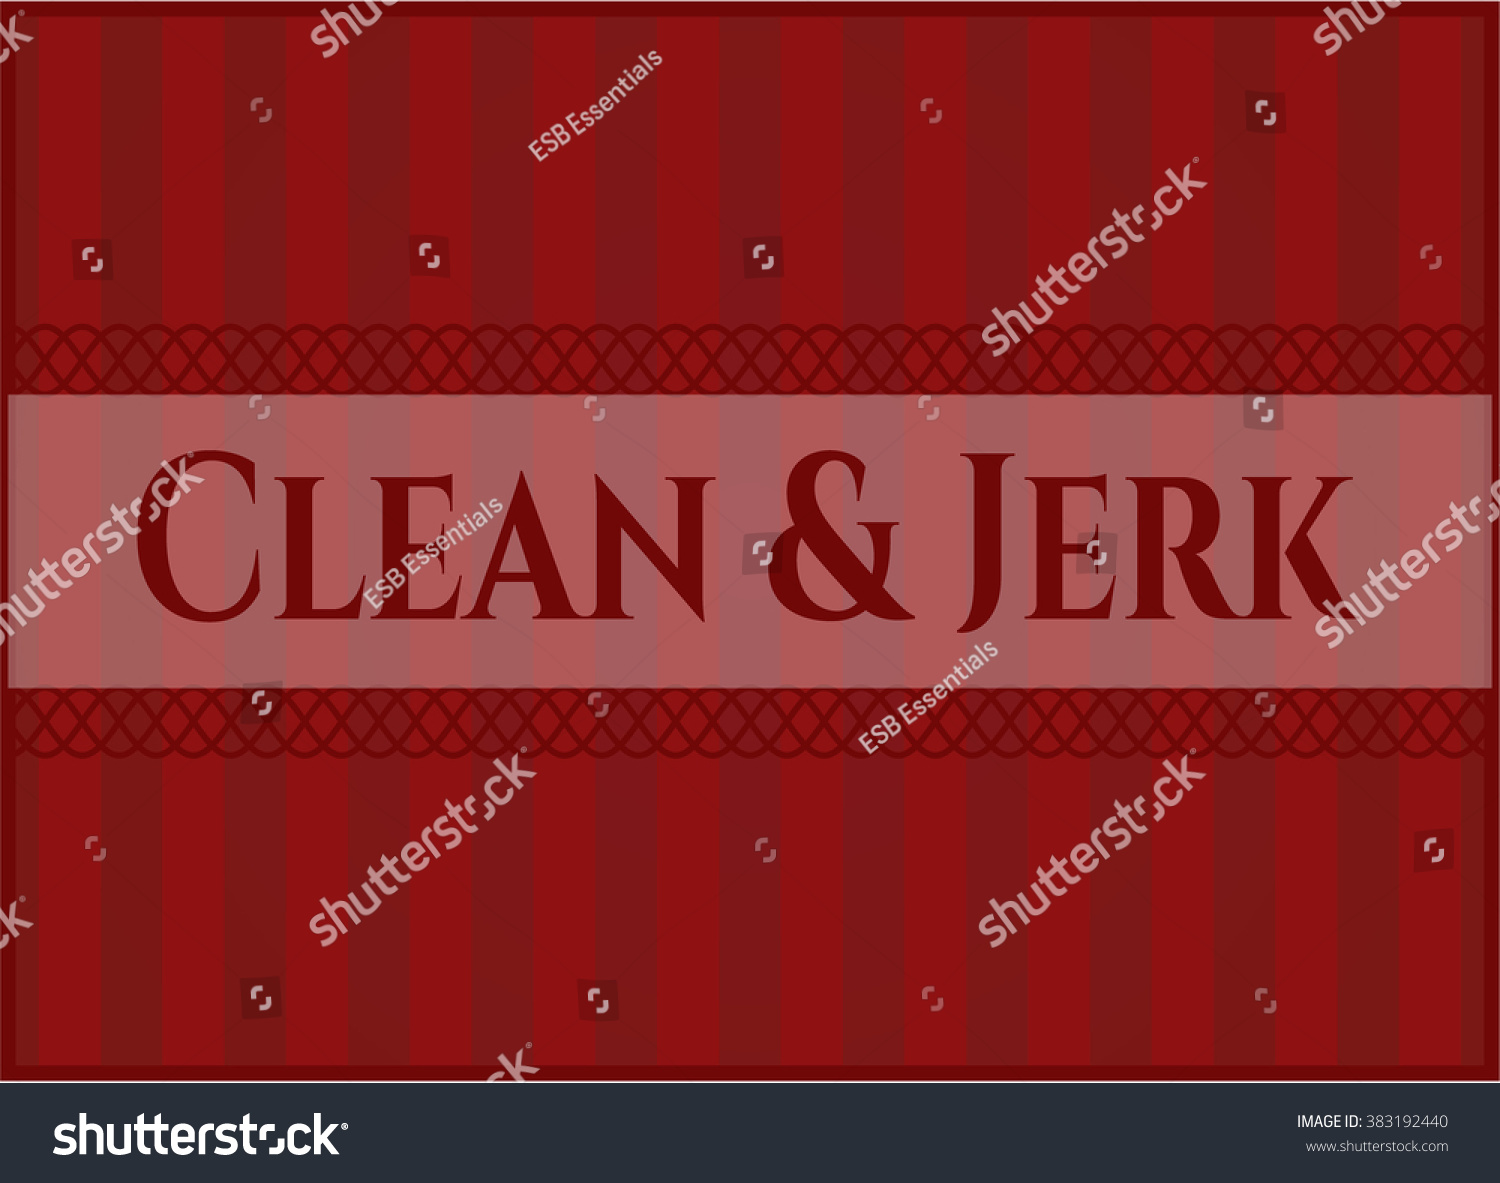 Clean & Jerk colorful poster #383192440